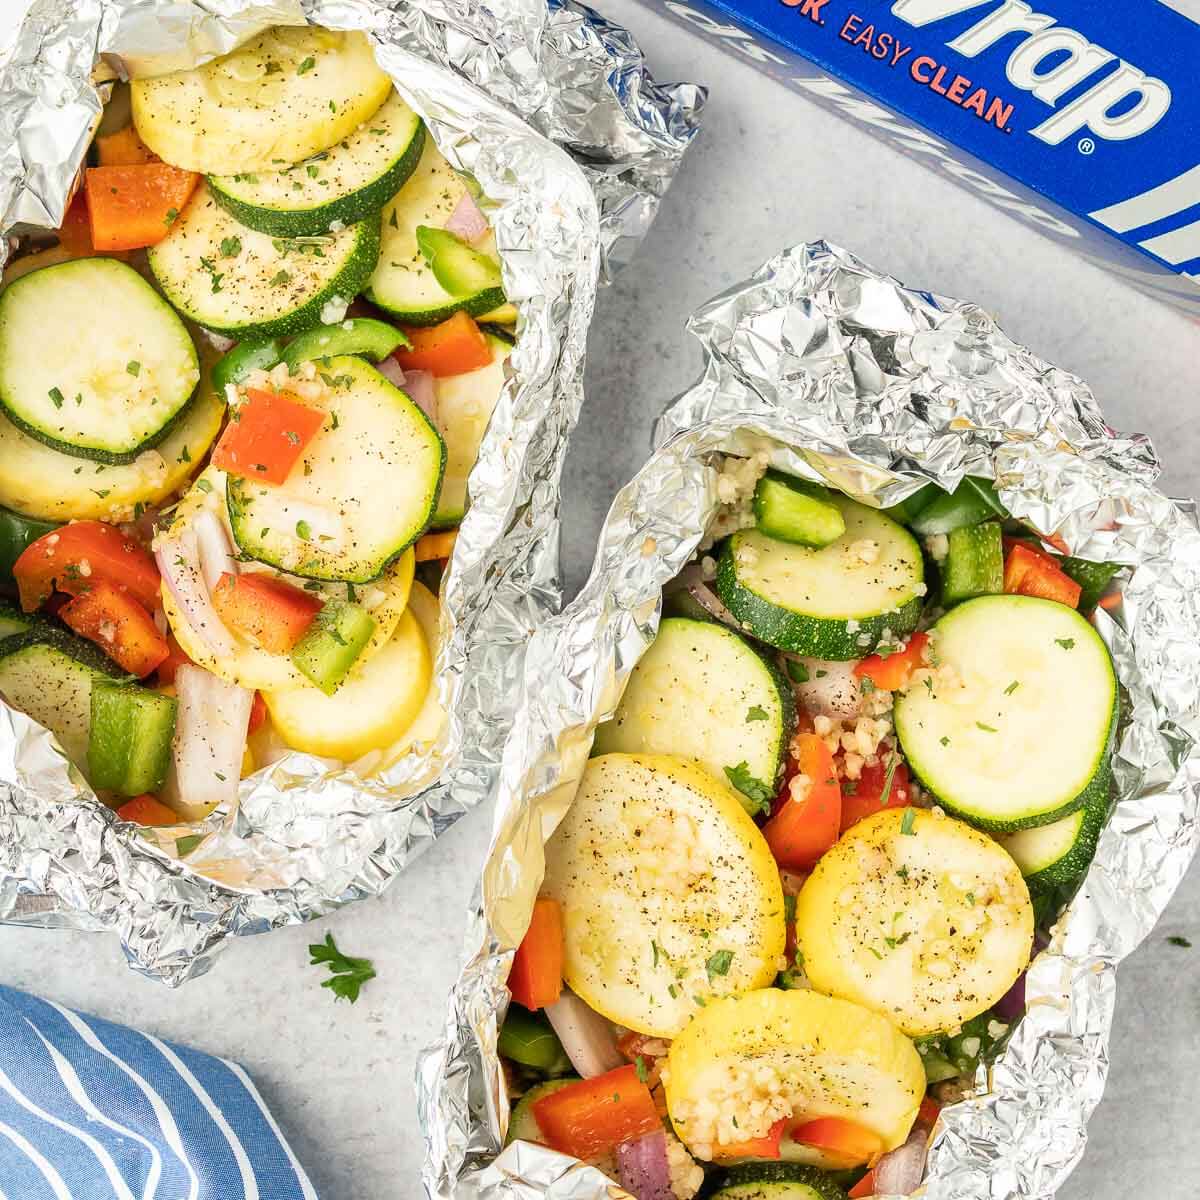 Alternatives to Using Aluminum Foil on the Grill